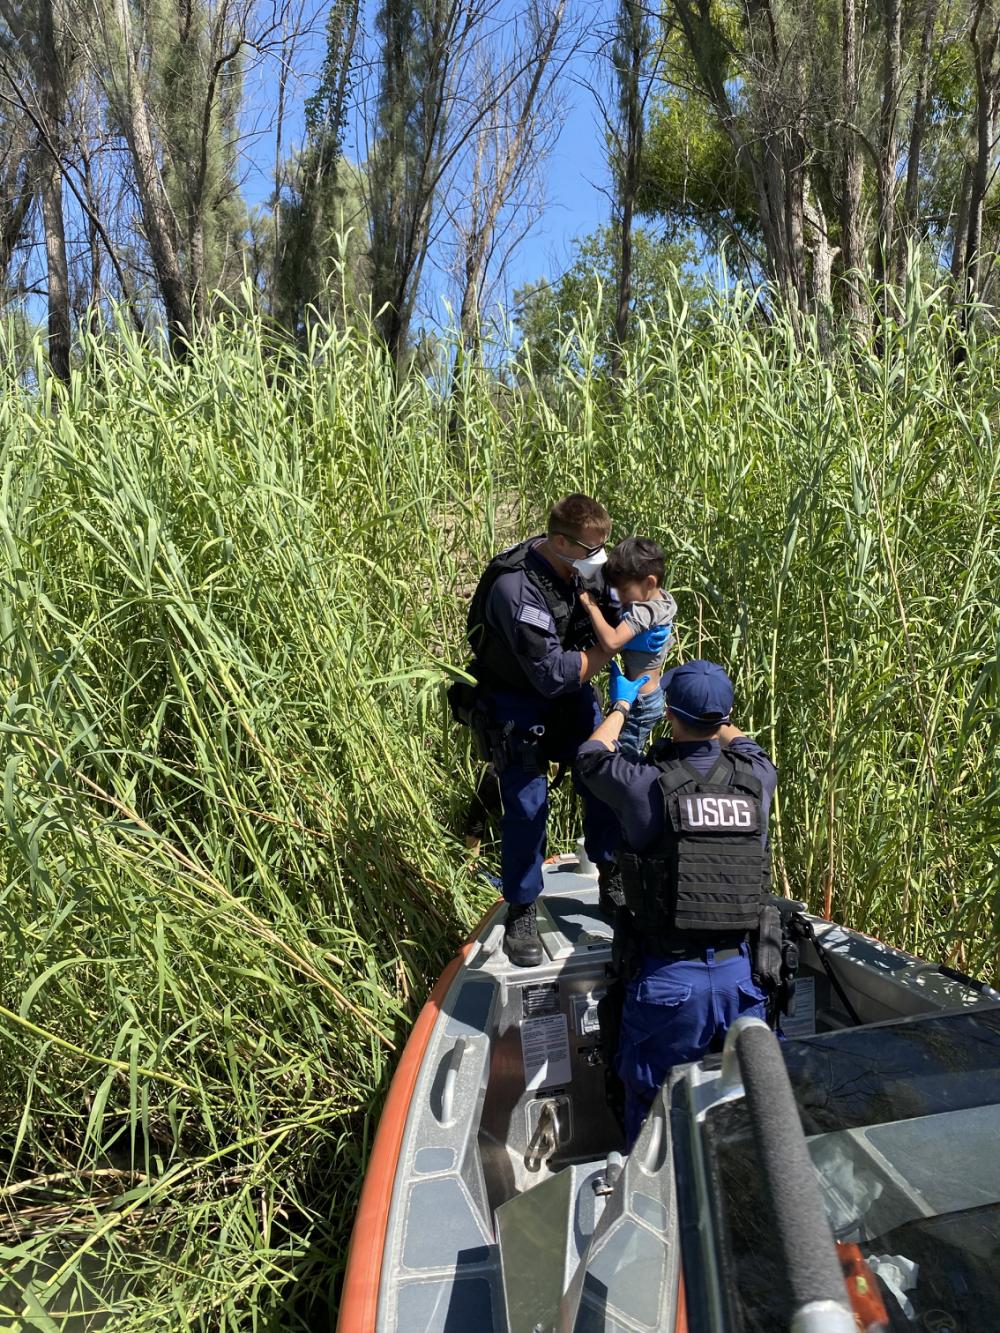 Members from Coast Guard Maritime Safety & Security Team Houston lift a child from the reeds on the U.S. riverbank of the Rio Grande, July 7, 2022. The boy and his mother, two non-citizens who crossed the river, got stranded and signaled for the Coast Guard crew’s help. (U.S. Coast Guard photo, courtesy Maritime Safety & Security Team Houston)